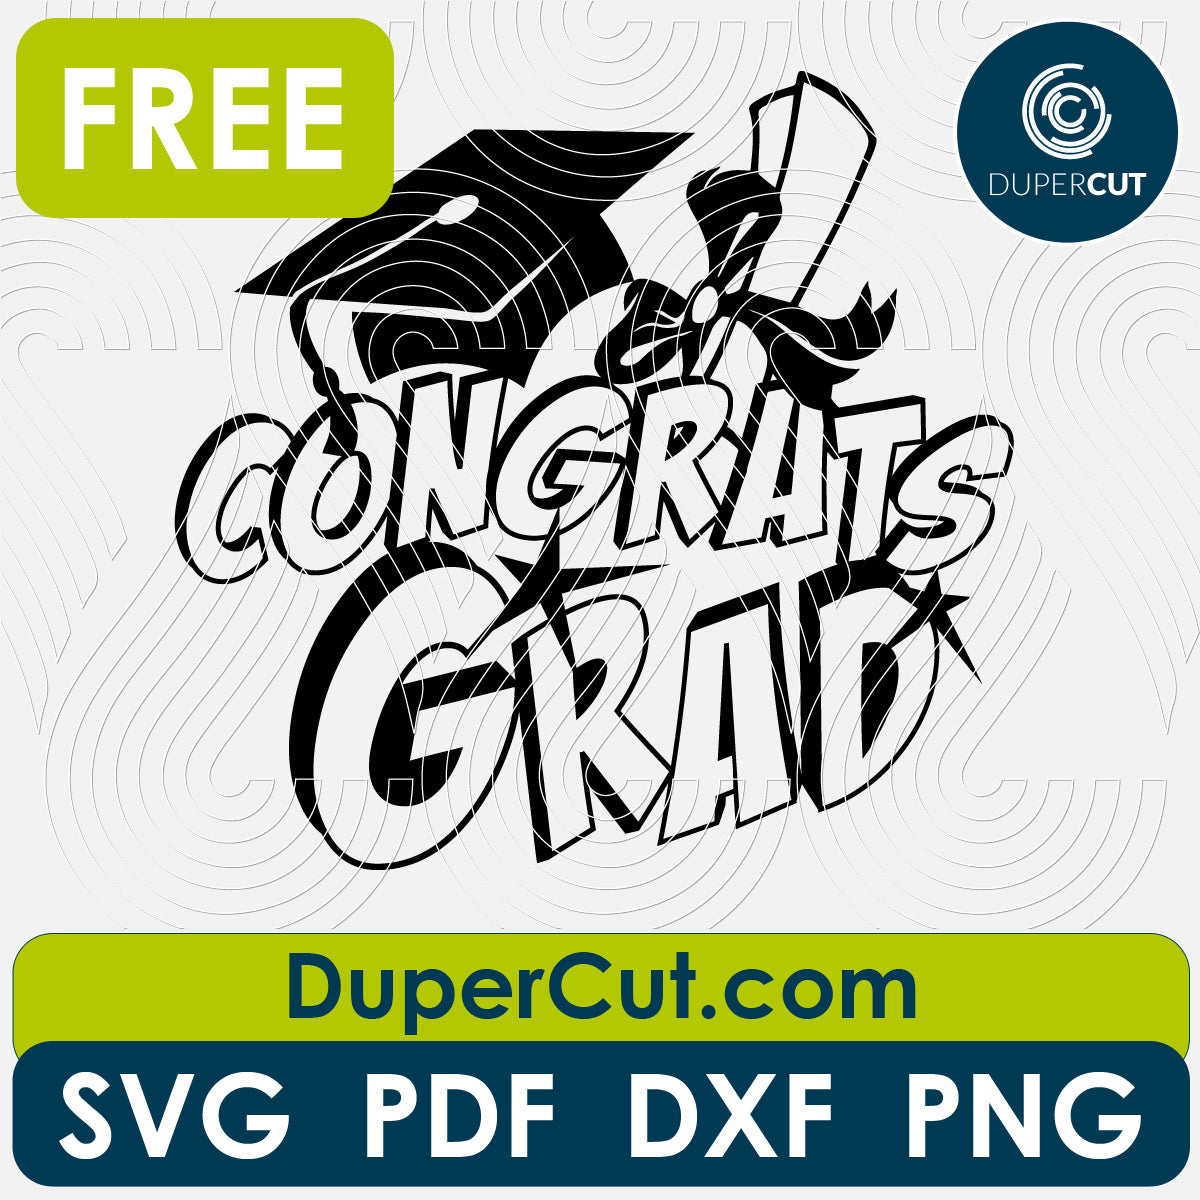 Congrats grad - free SVG PNG DXF vector files for laser and blade cutting machines. Glowforge, Cricut, Silhouette cameo templates by www.DuperCut.com